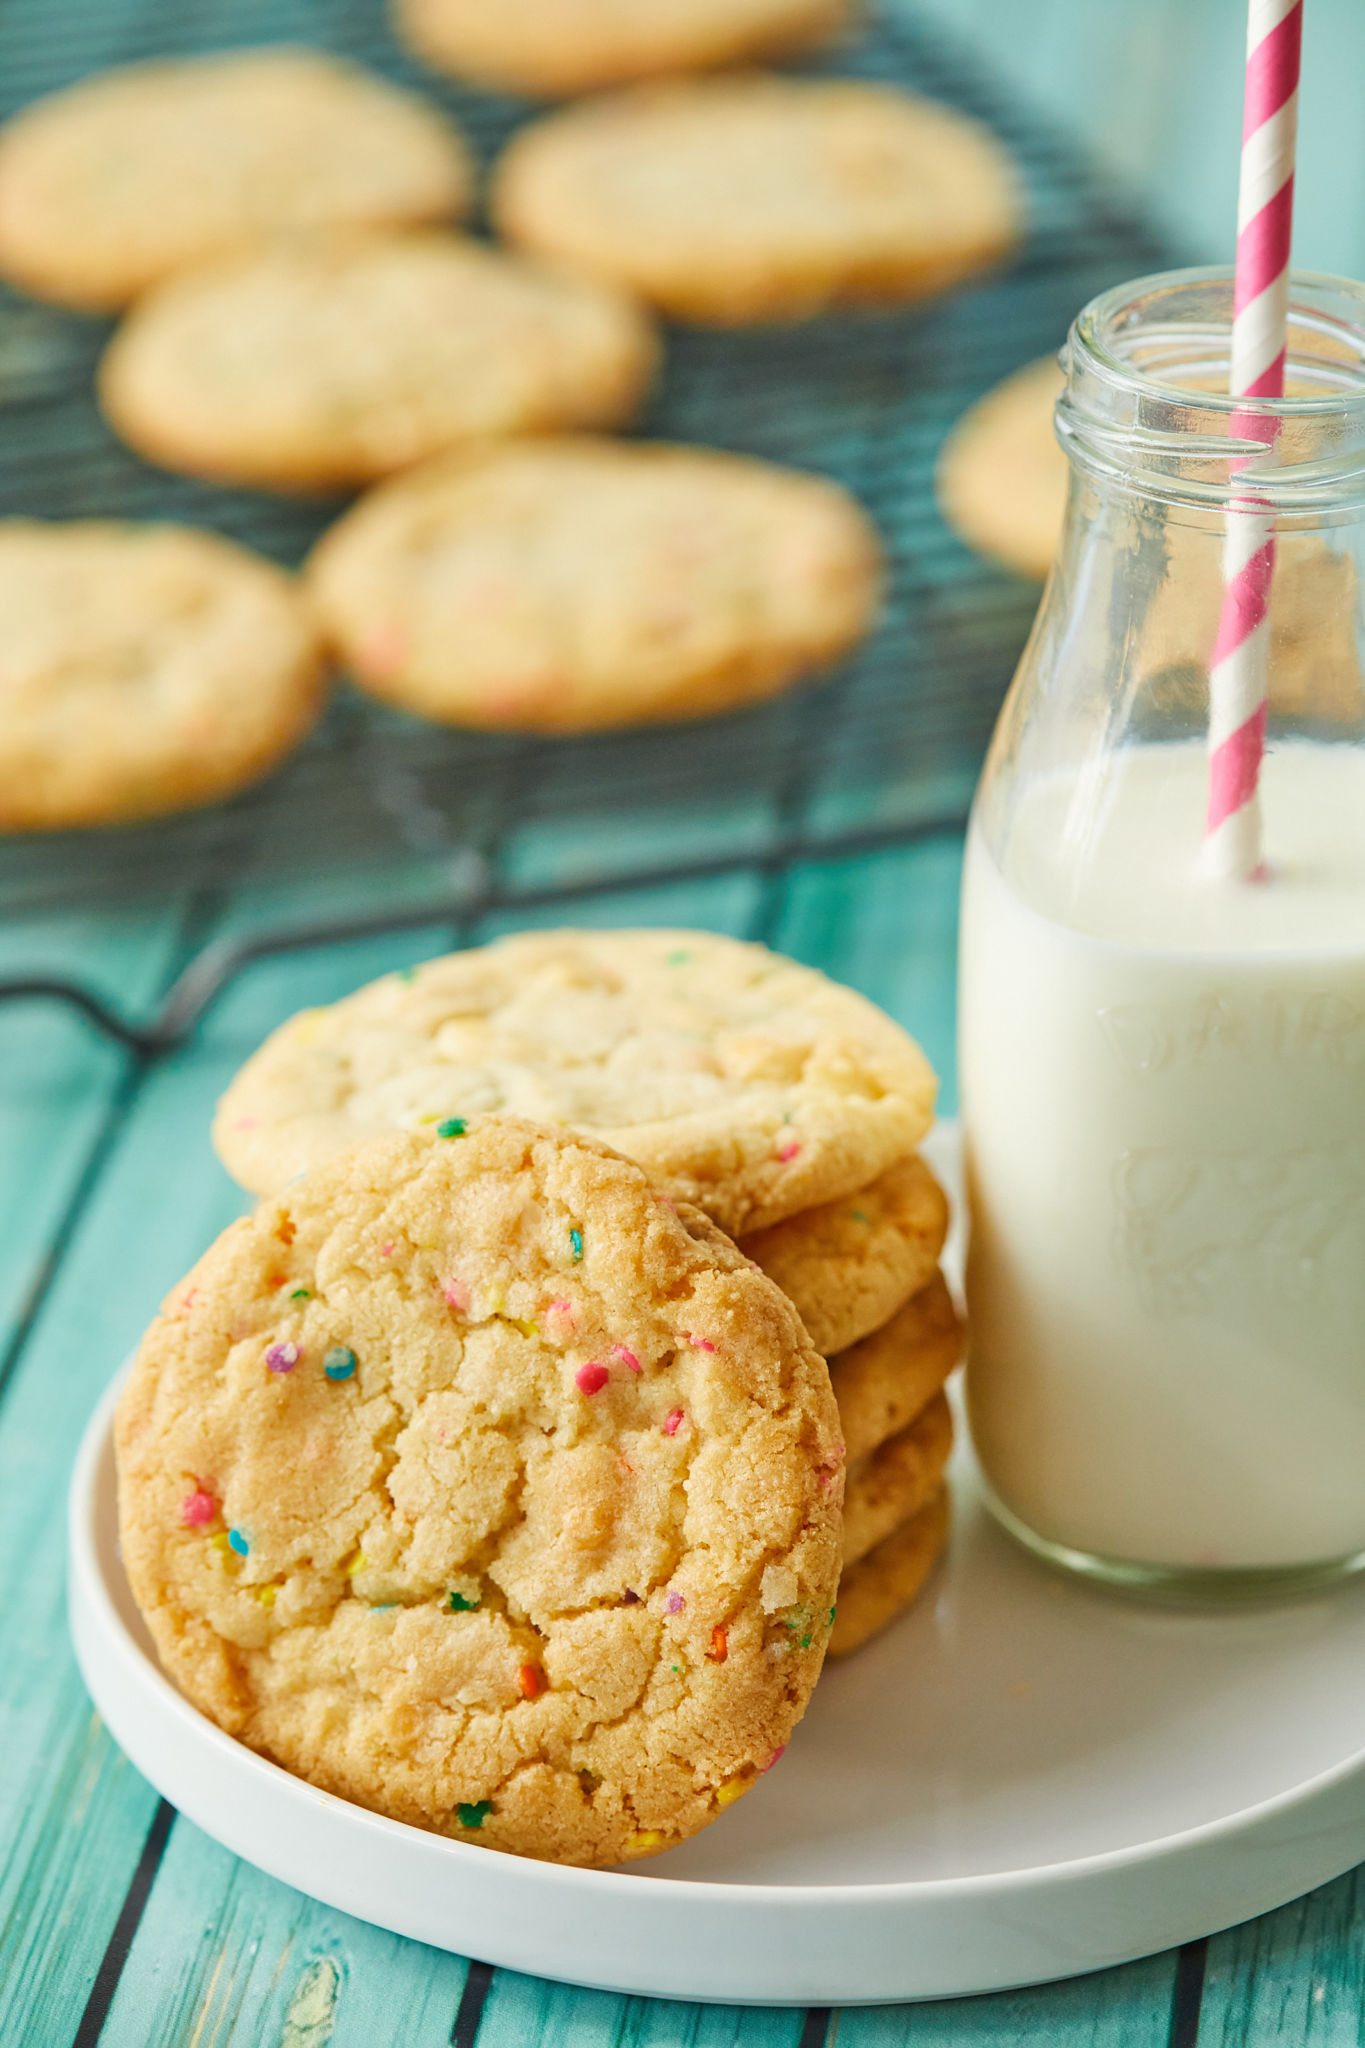 A stack of Funfetti cookies next to a glass of milk.